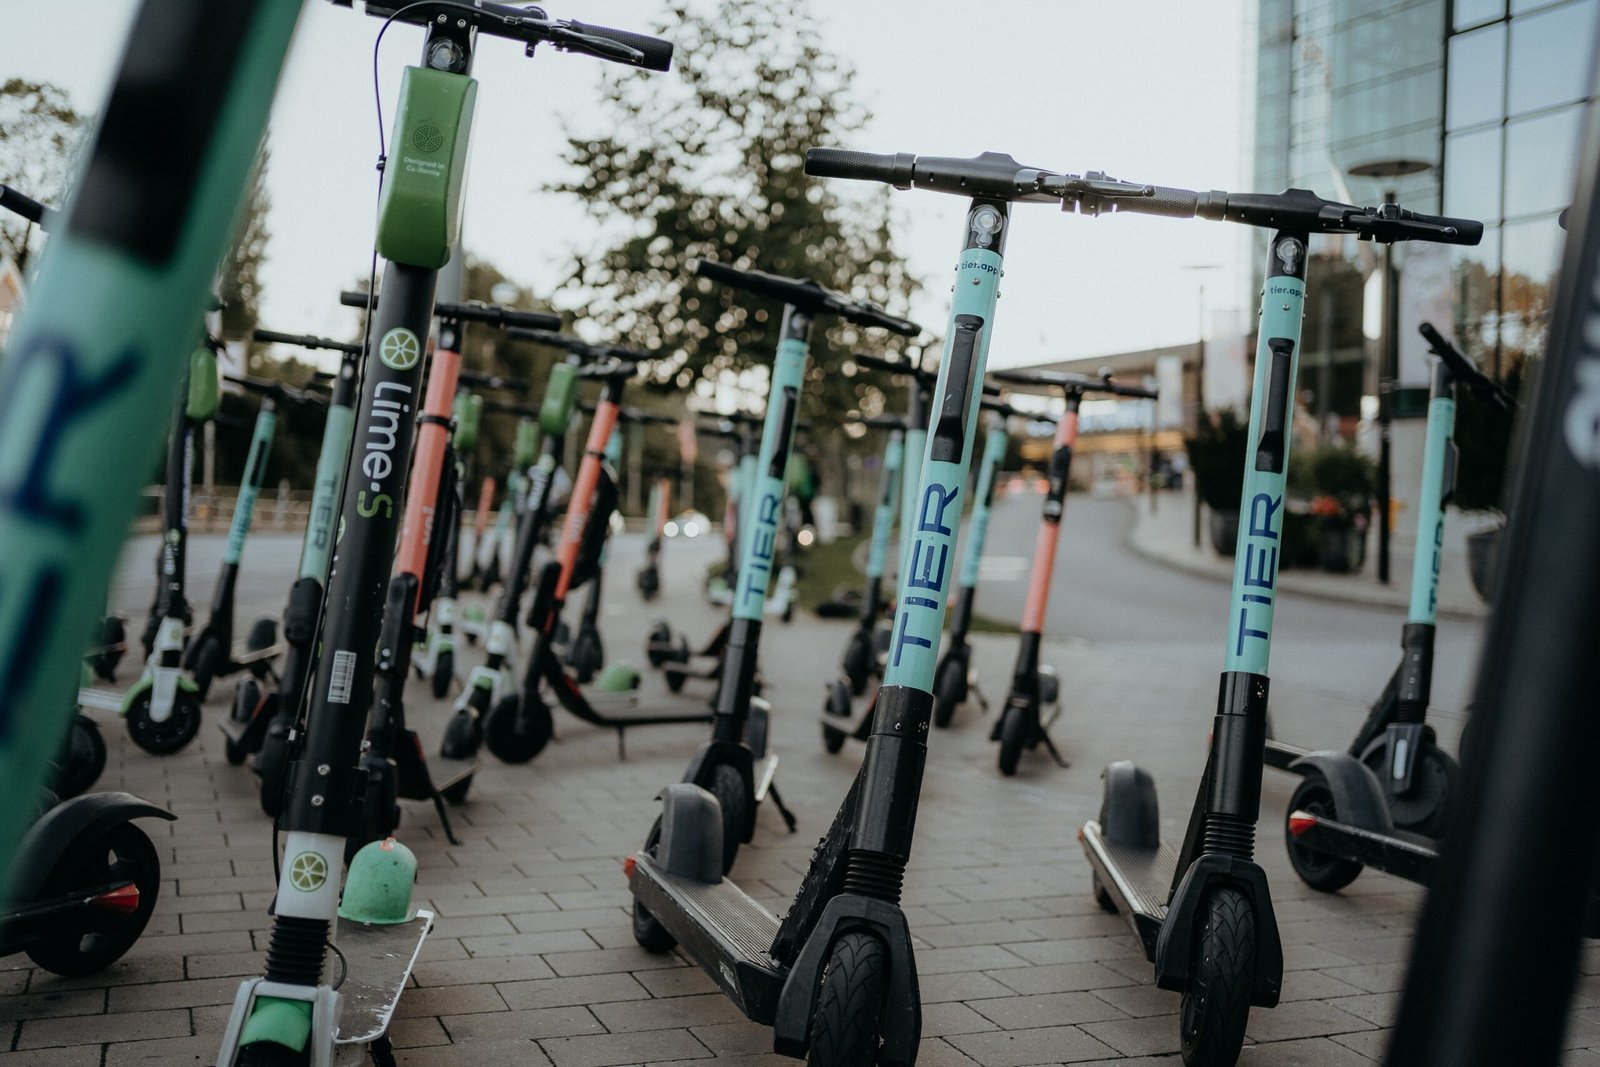 Can I Use An Electric Scooter For Recreational Purposes Like Participating In Scooter Races?